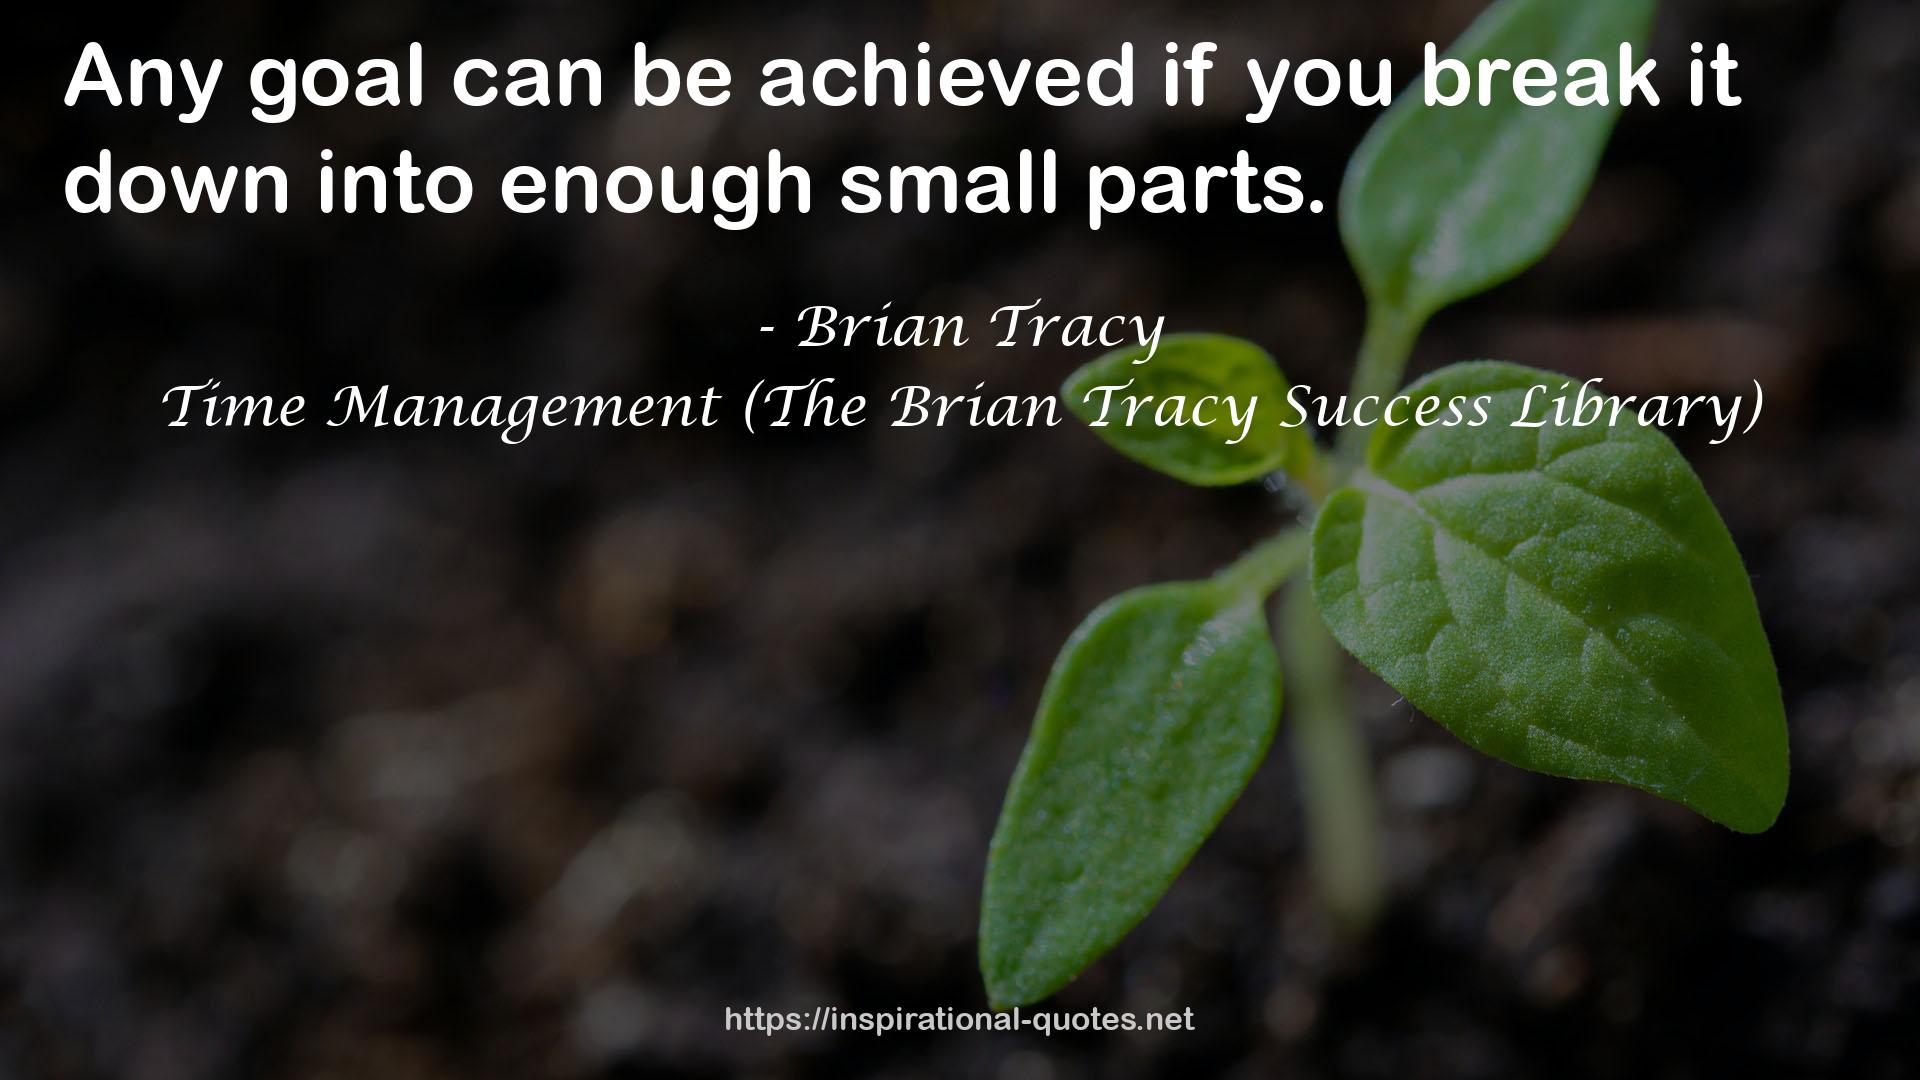 Time Management (The Brian Tracy Success Library) QUOTES